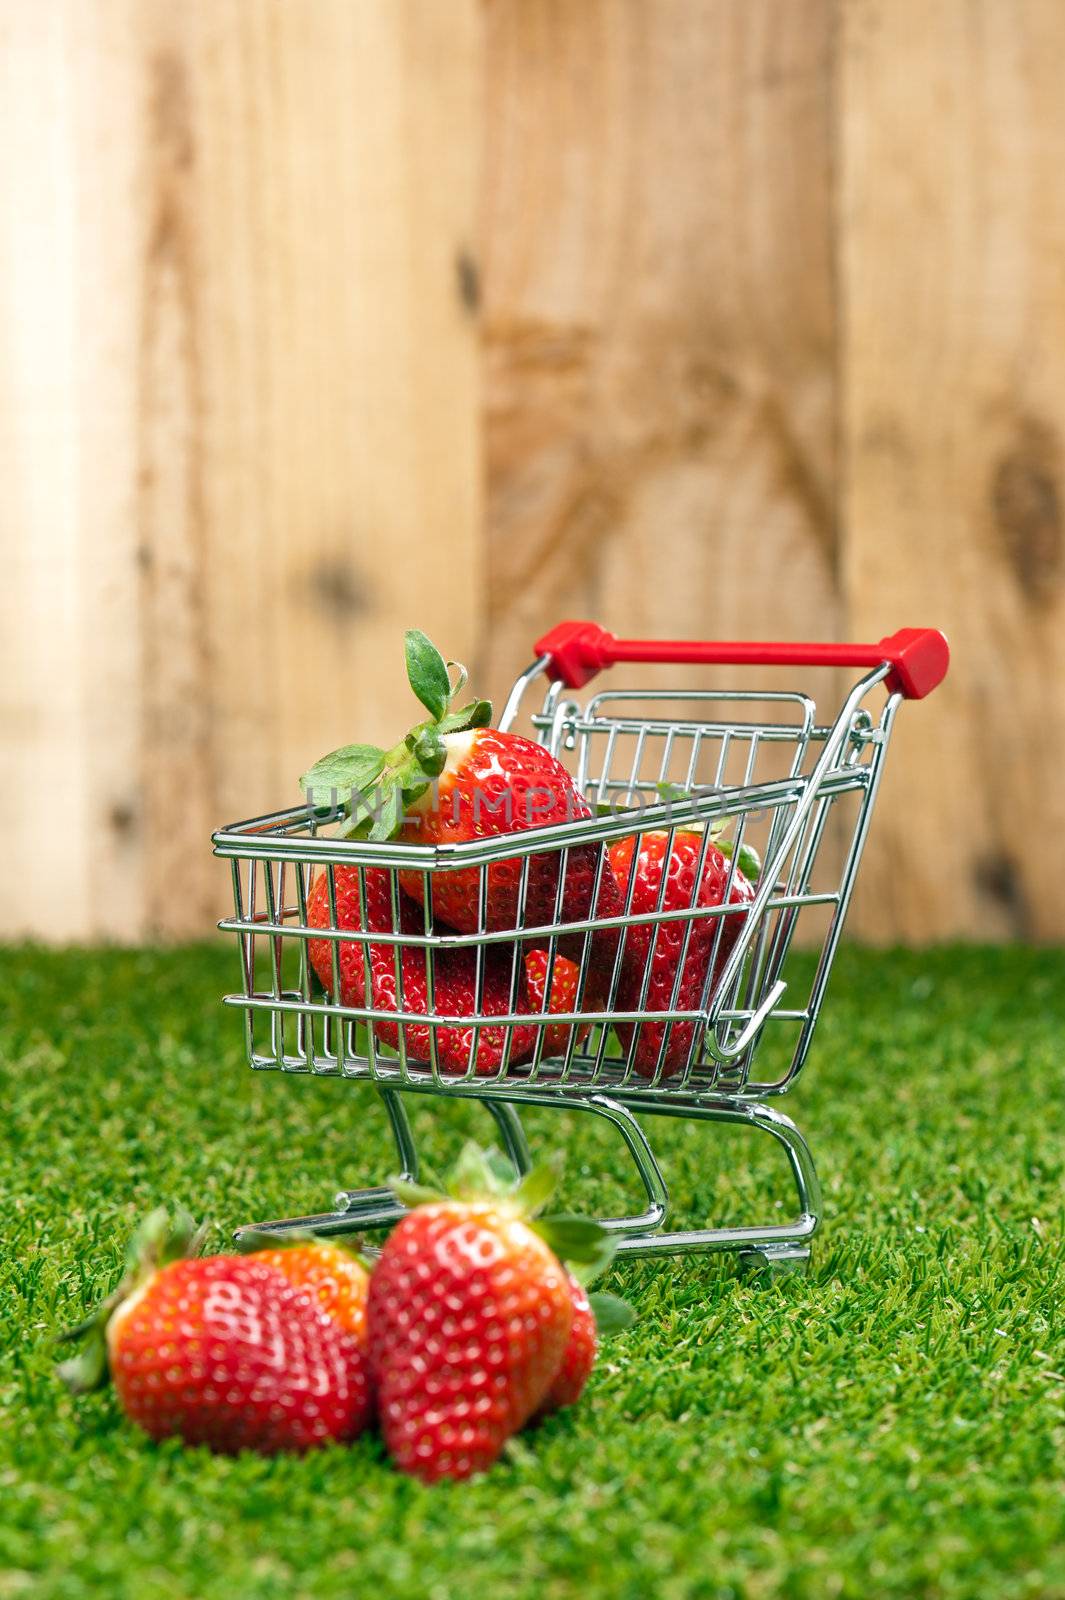 Strawberries in a shopping cart by 3523Studio